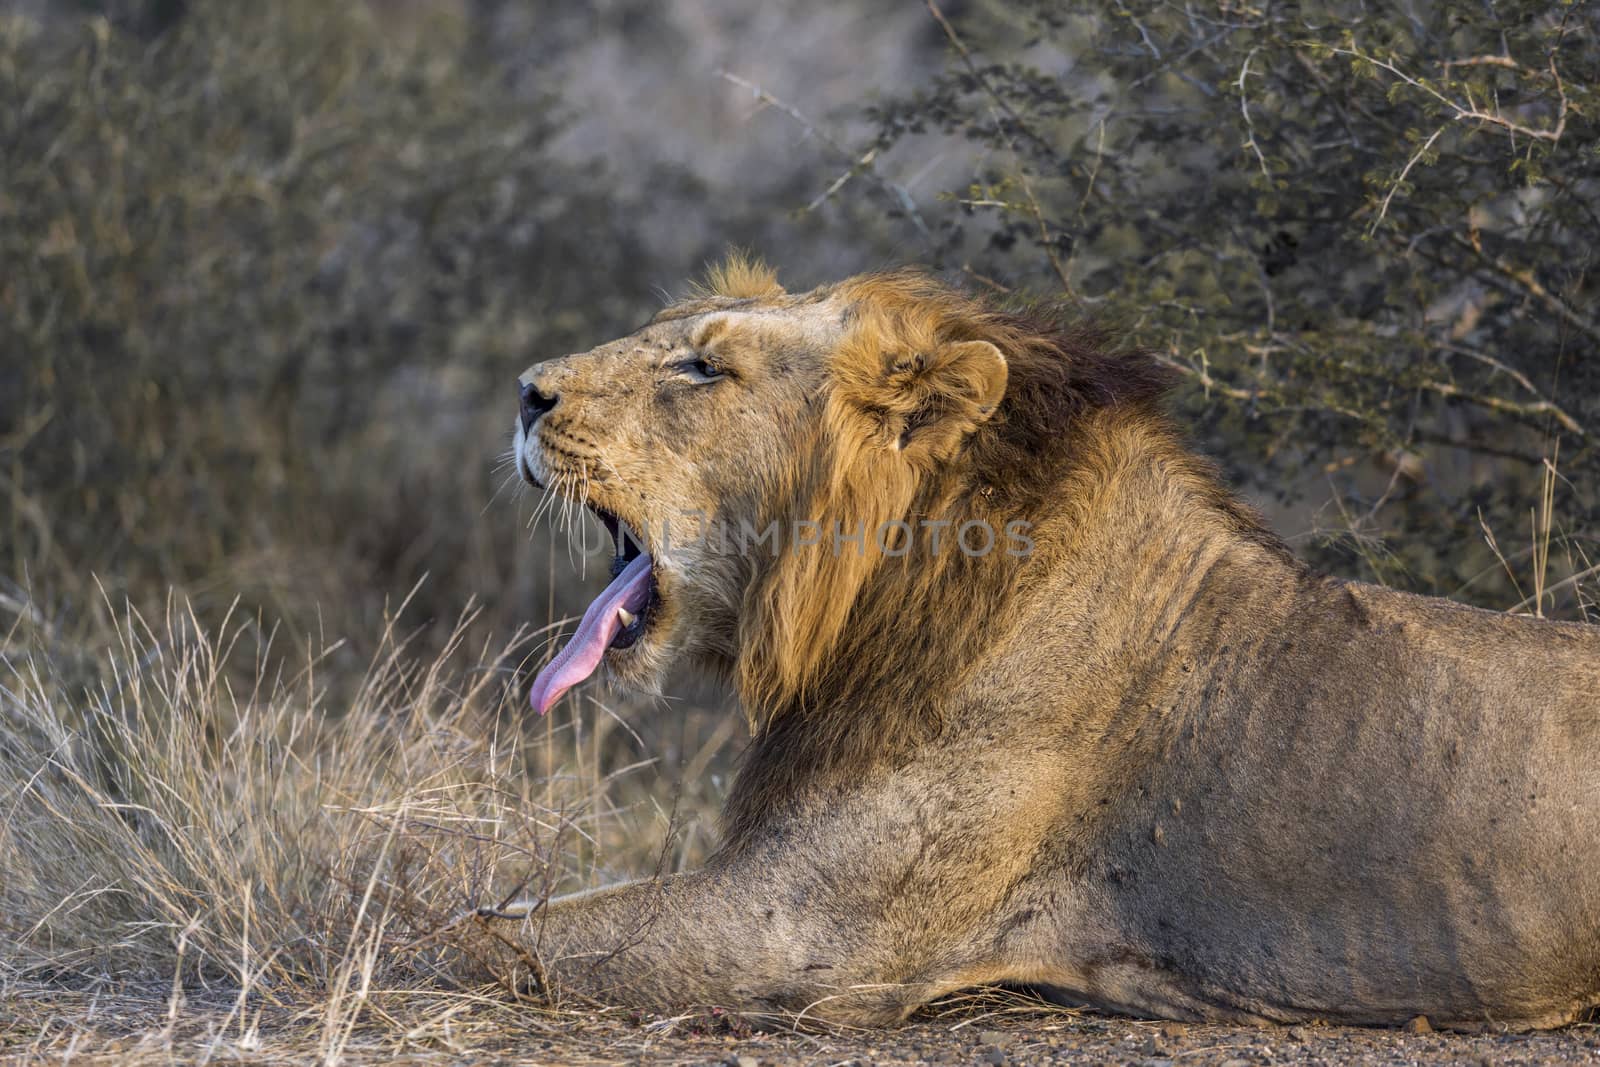 African lion male portrait yawning in Kruger National park, South Africa ; Specie Panthera leo family of Felidae